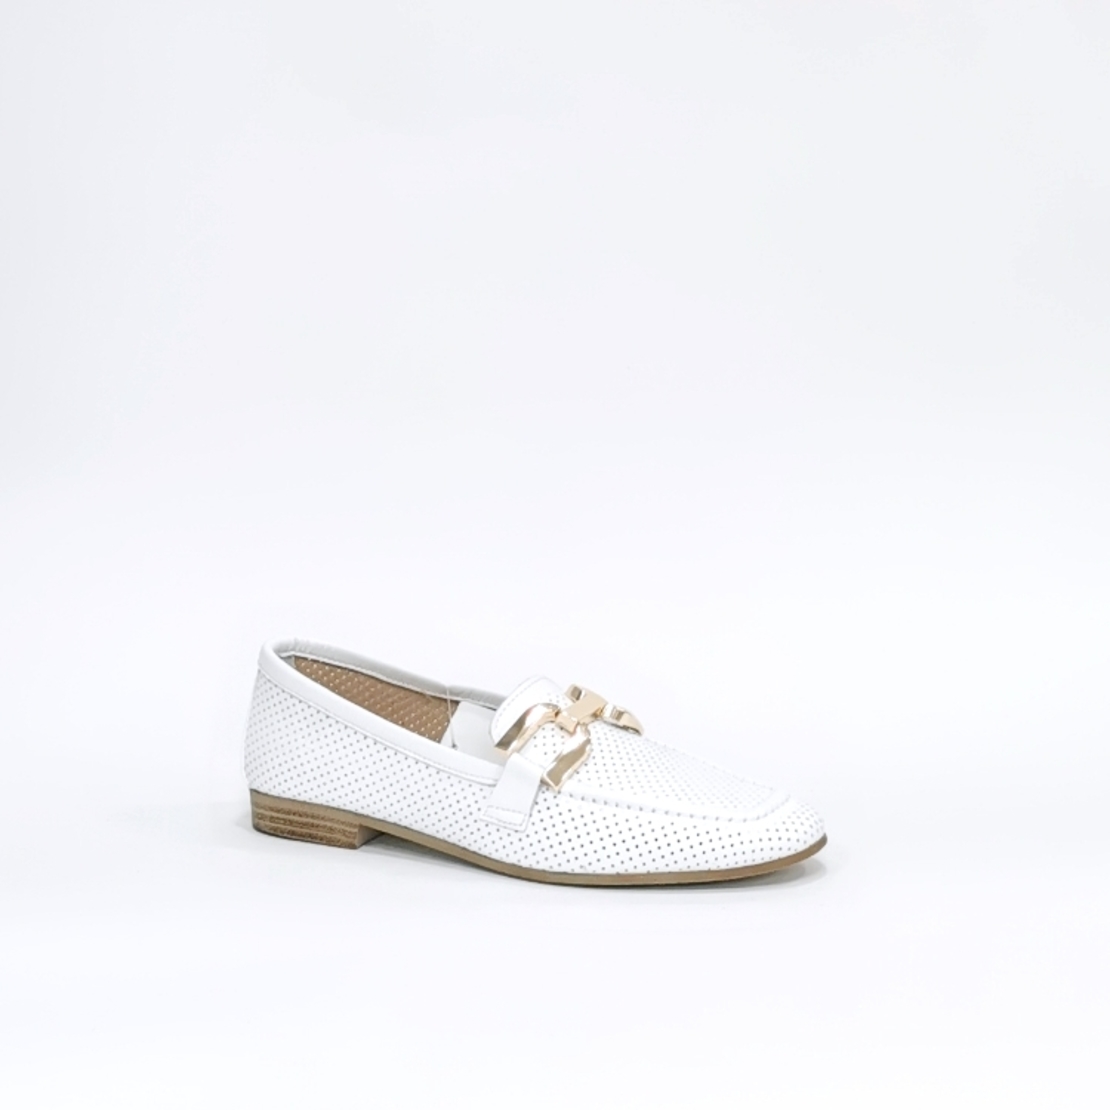 Women's moccasins / loafers / made of natural leather in white color/7163